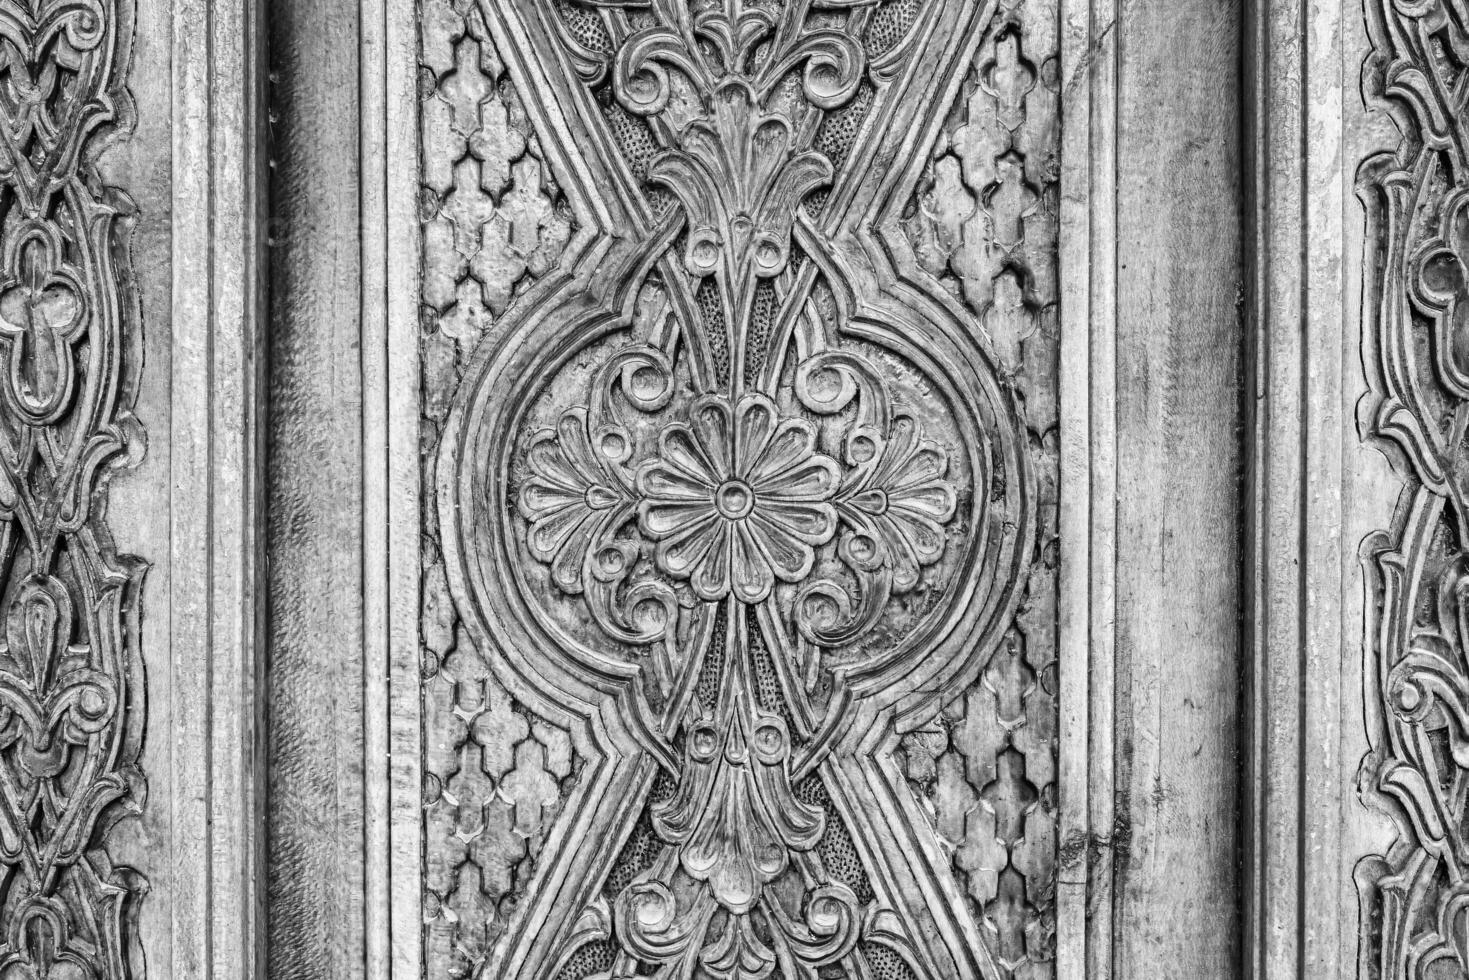 Carved wooden doors with patterns and mosaics. photo